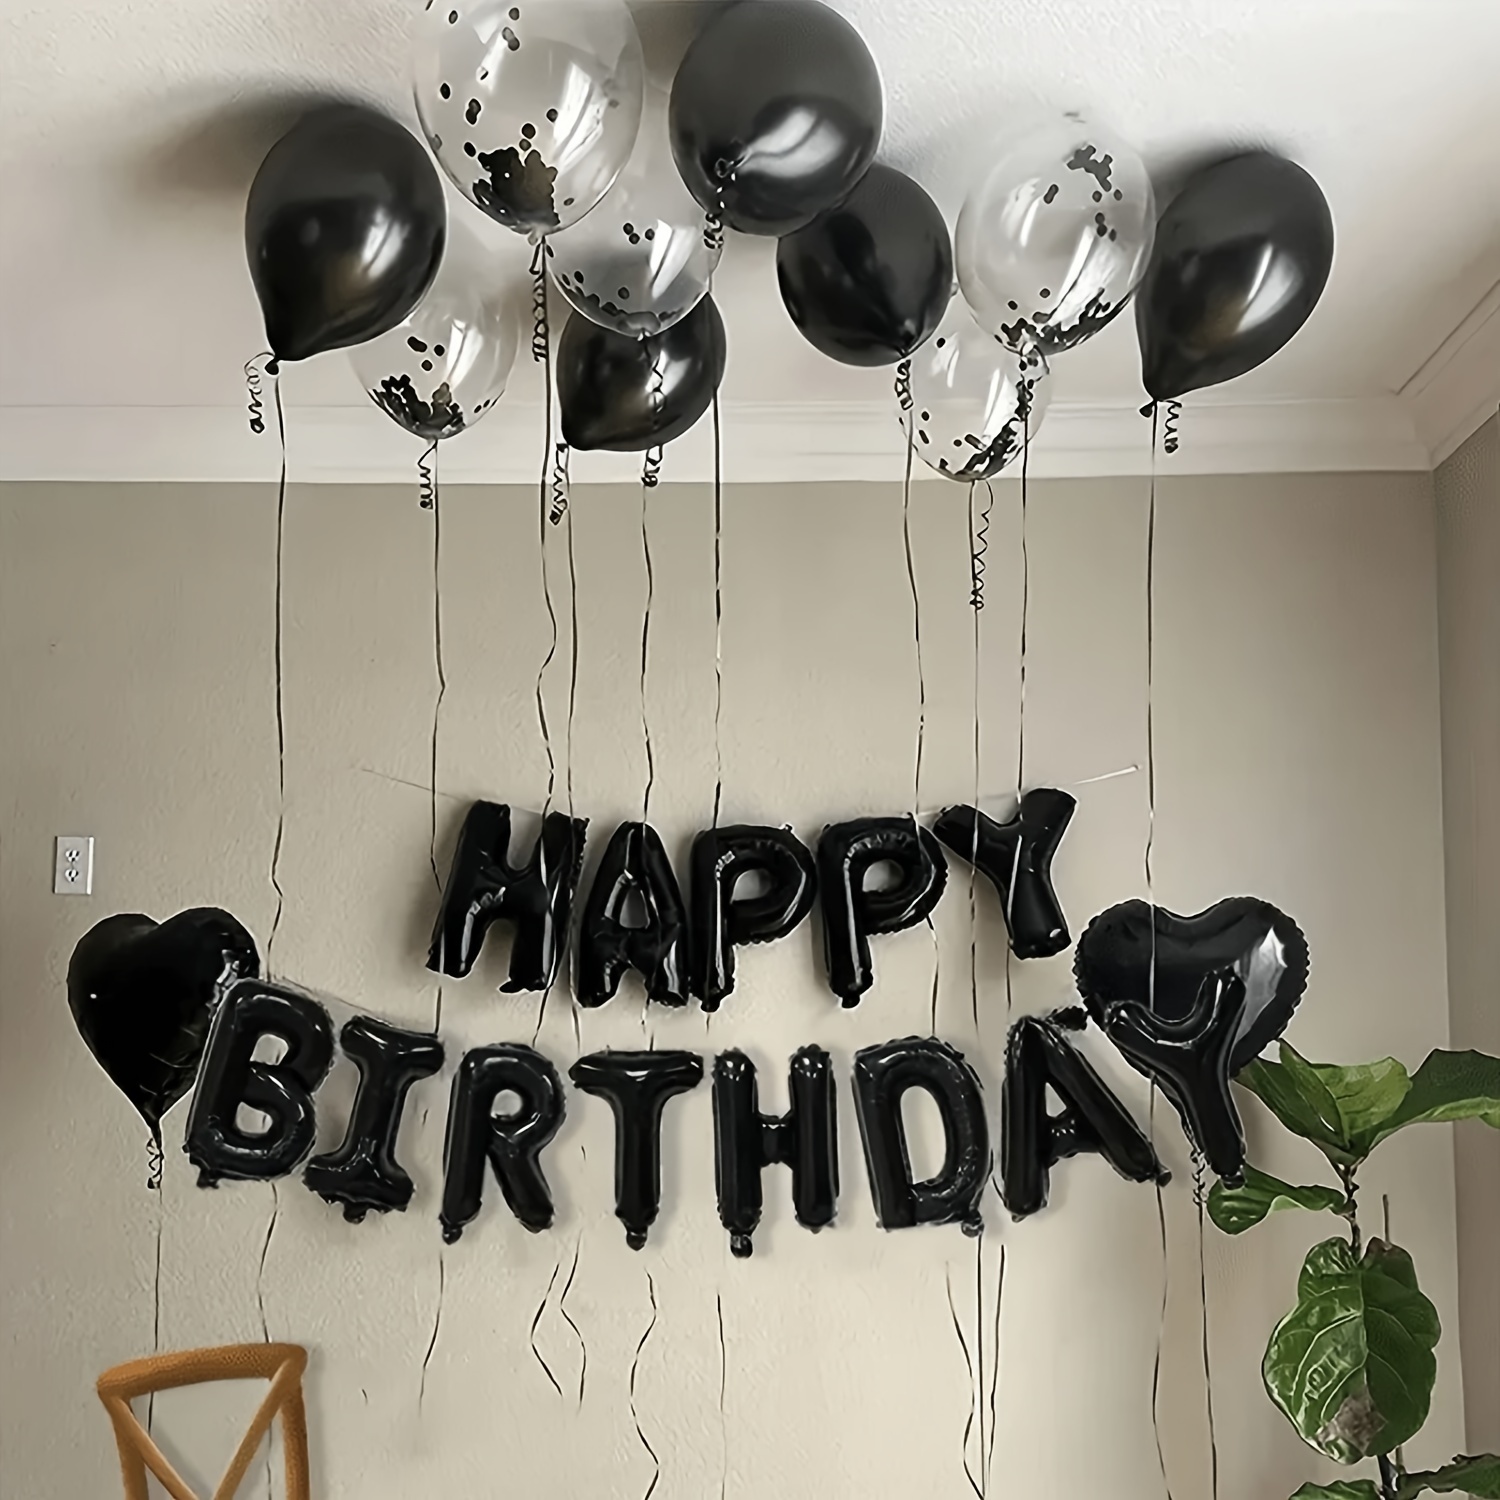 

32-piece Black Happy Birthday Balloon Banner Set - 3d Mylar Foil Letters For Party Decor, Perfect For Teens & Adults